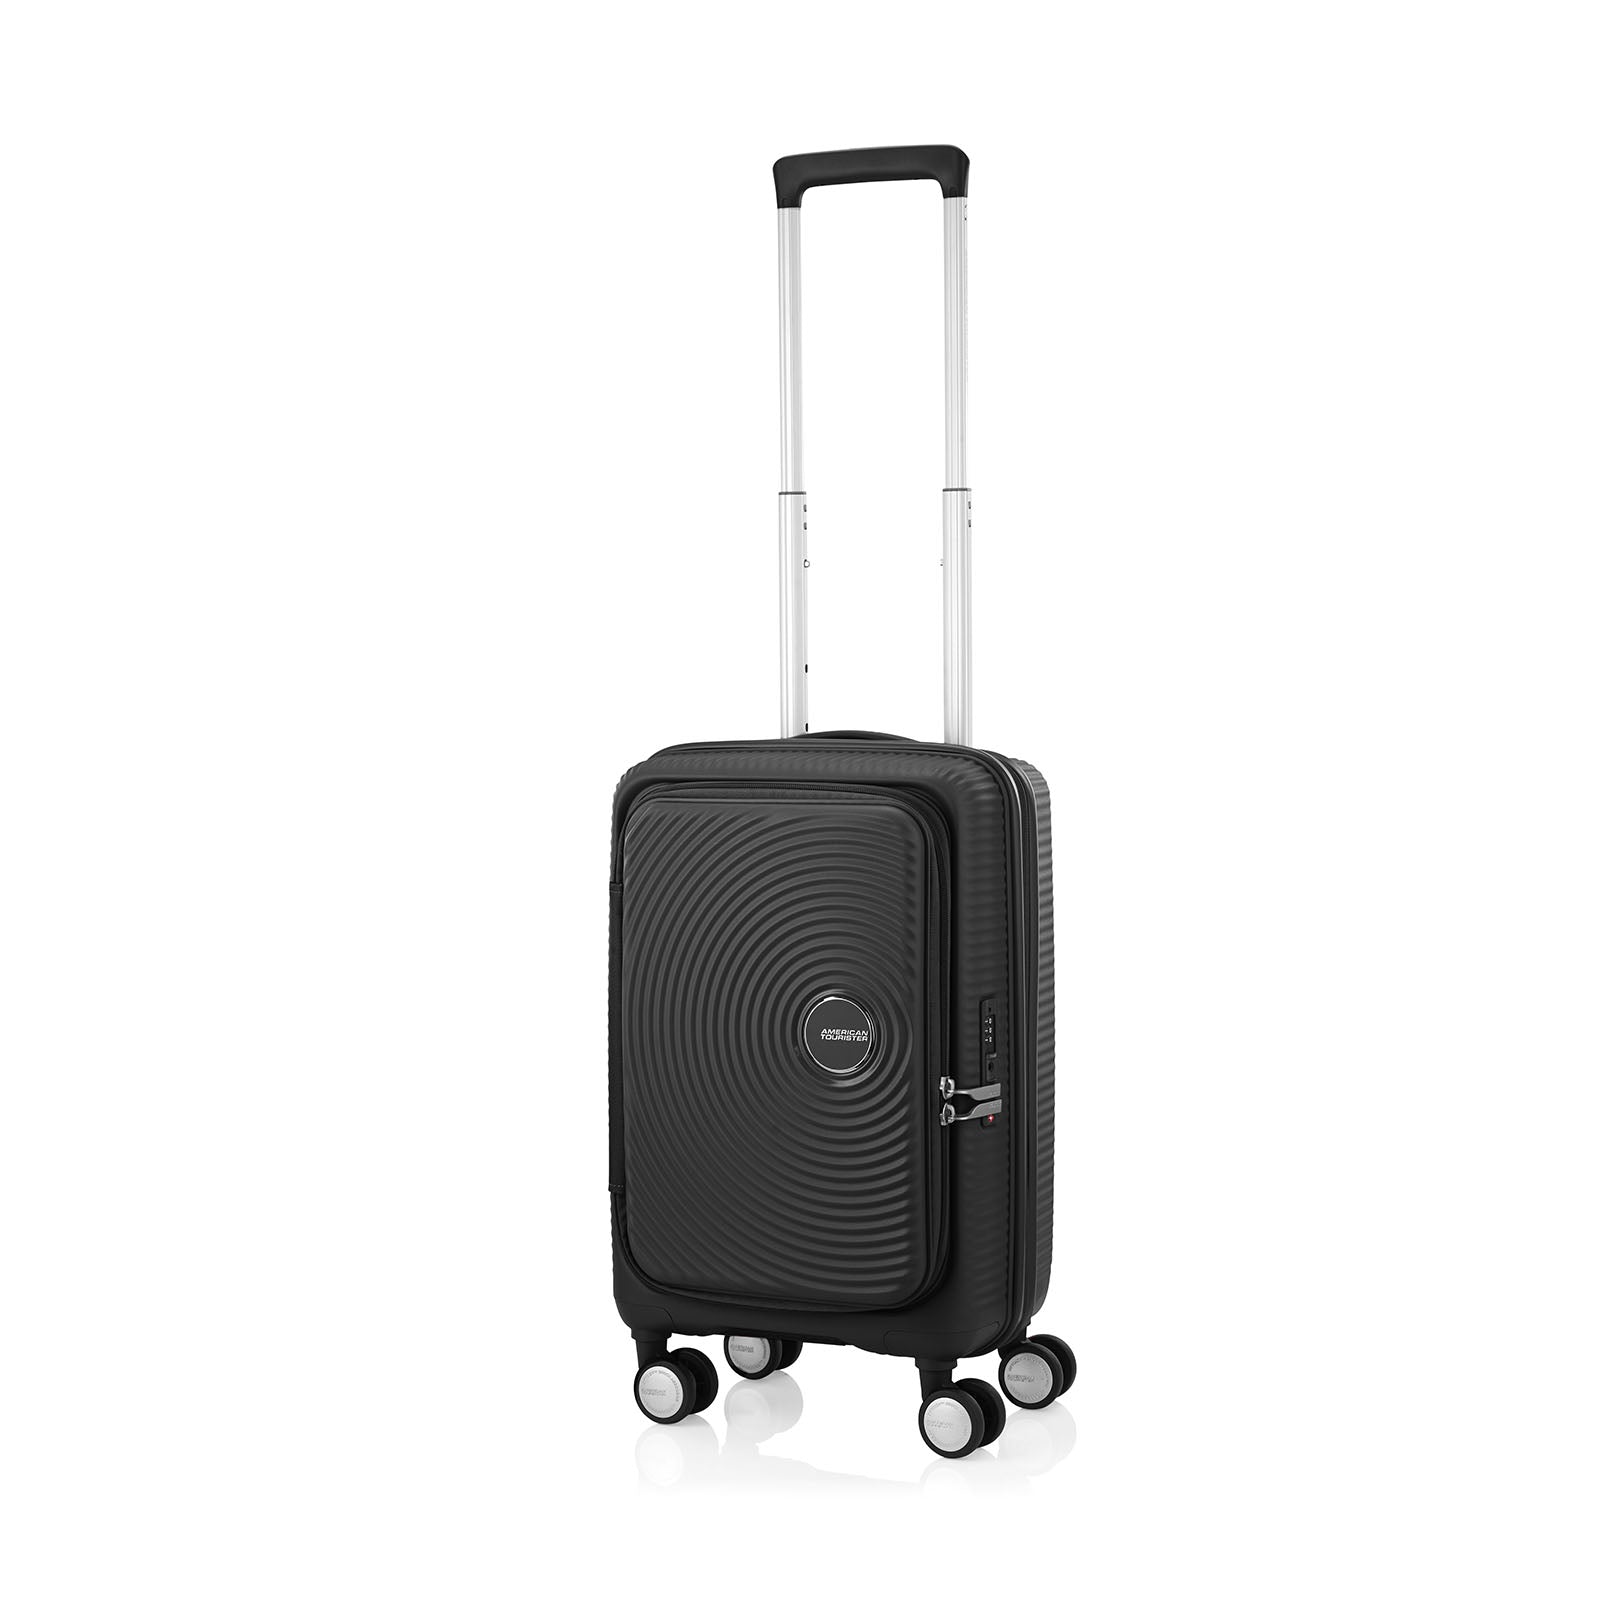 American-Tourister-Curio-Book-Opening-55cm-Carry-On-Suitcase-Black-Front-Angle